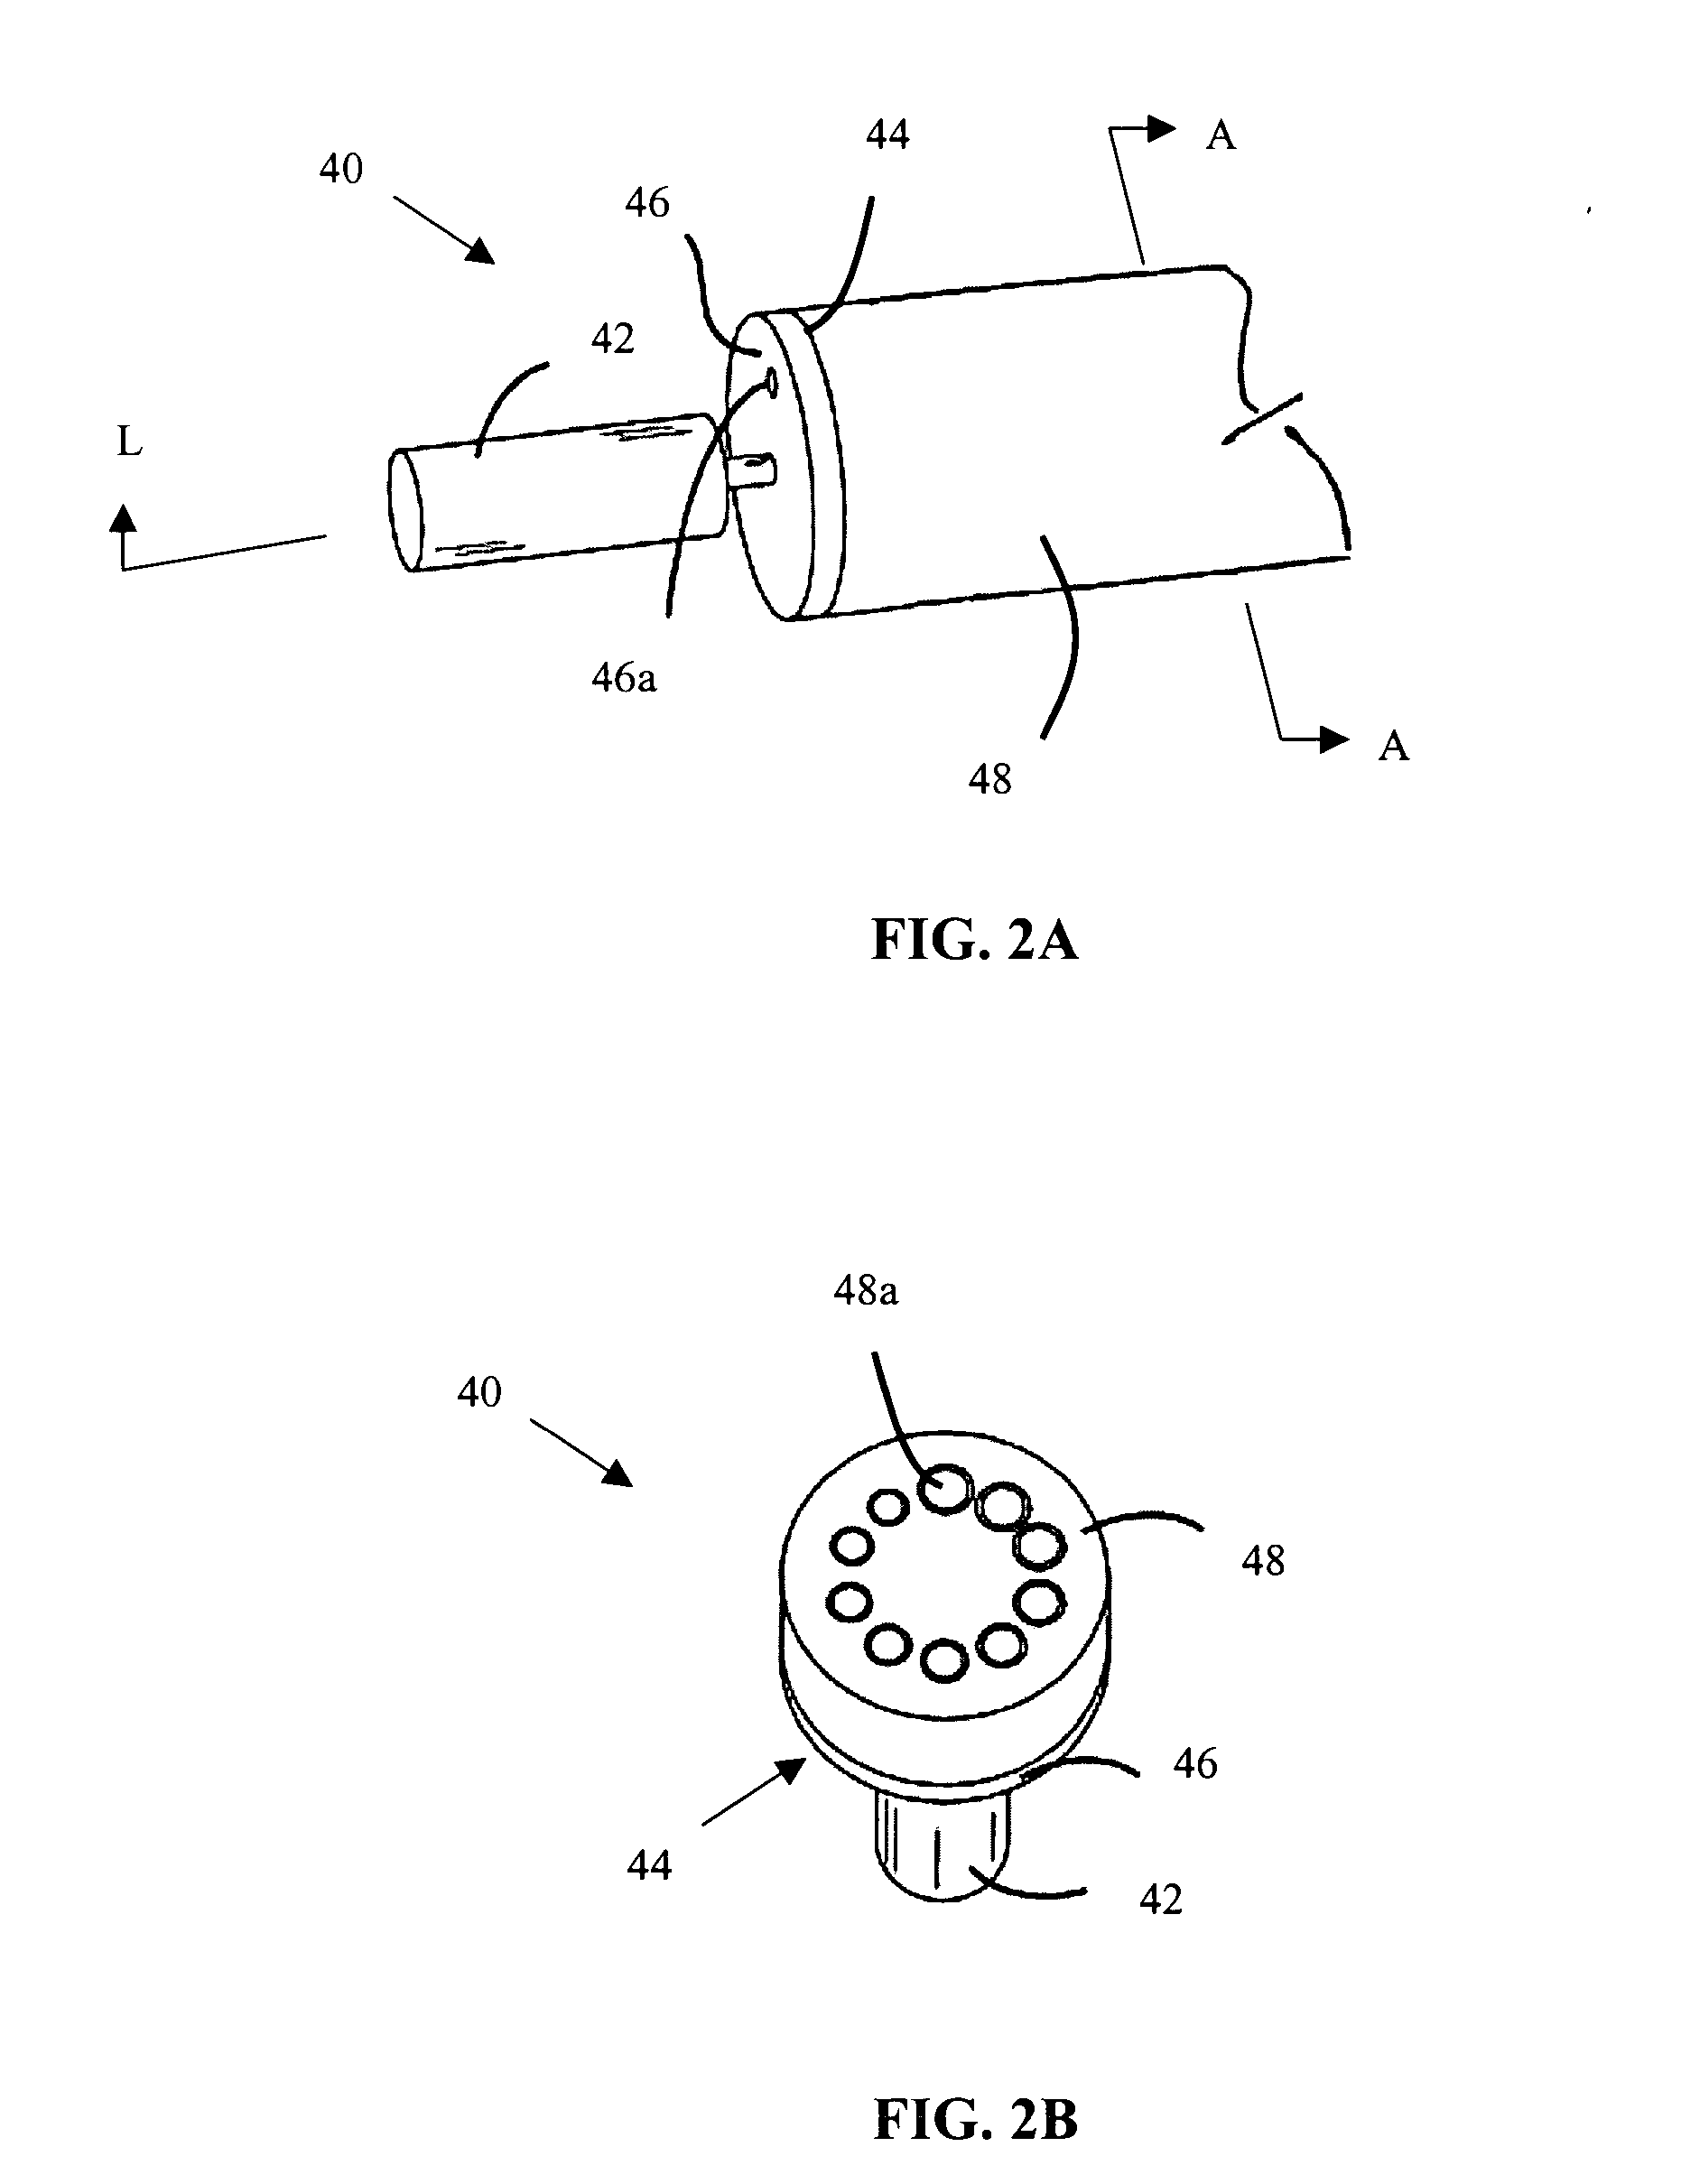 Method and apparatus for managing normal pressure hydrocephalus